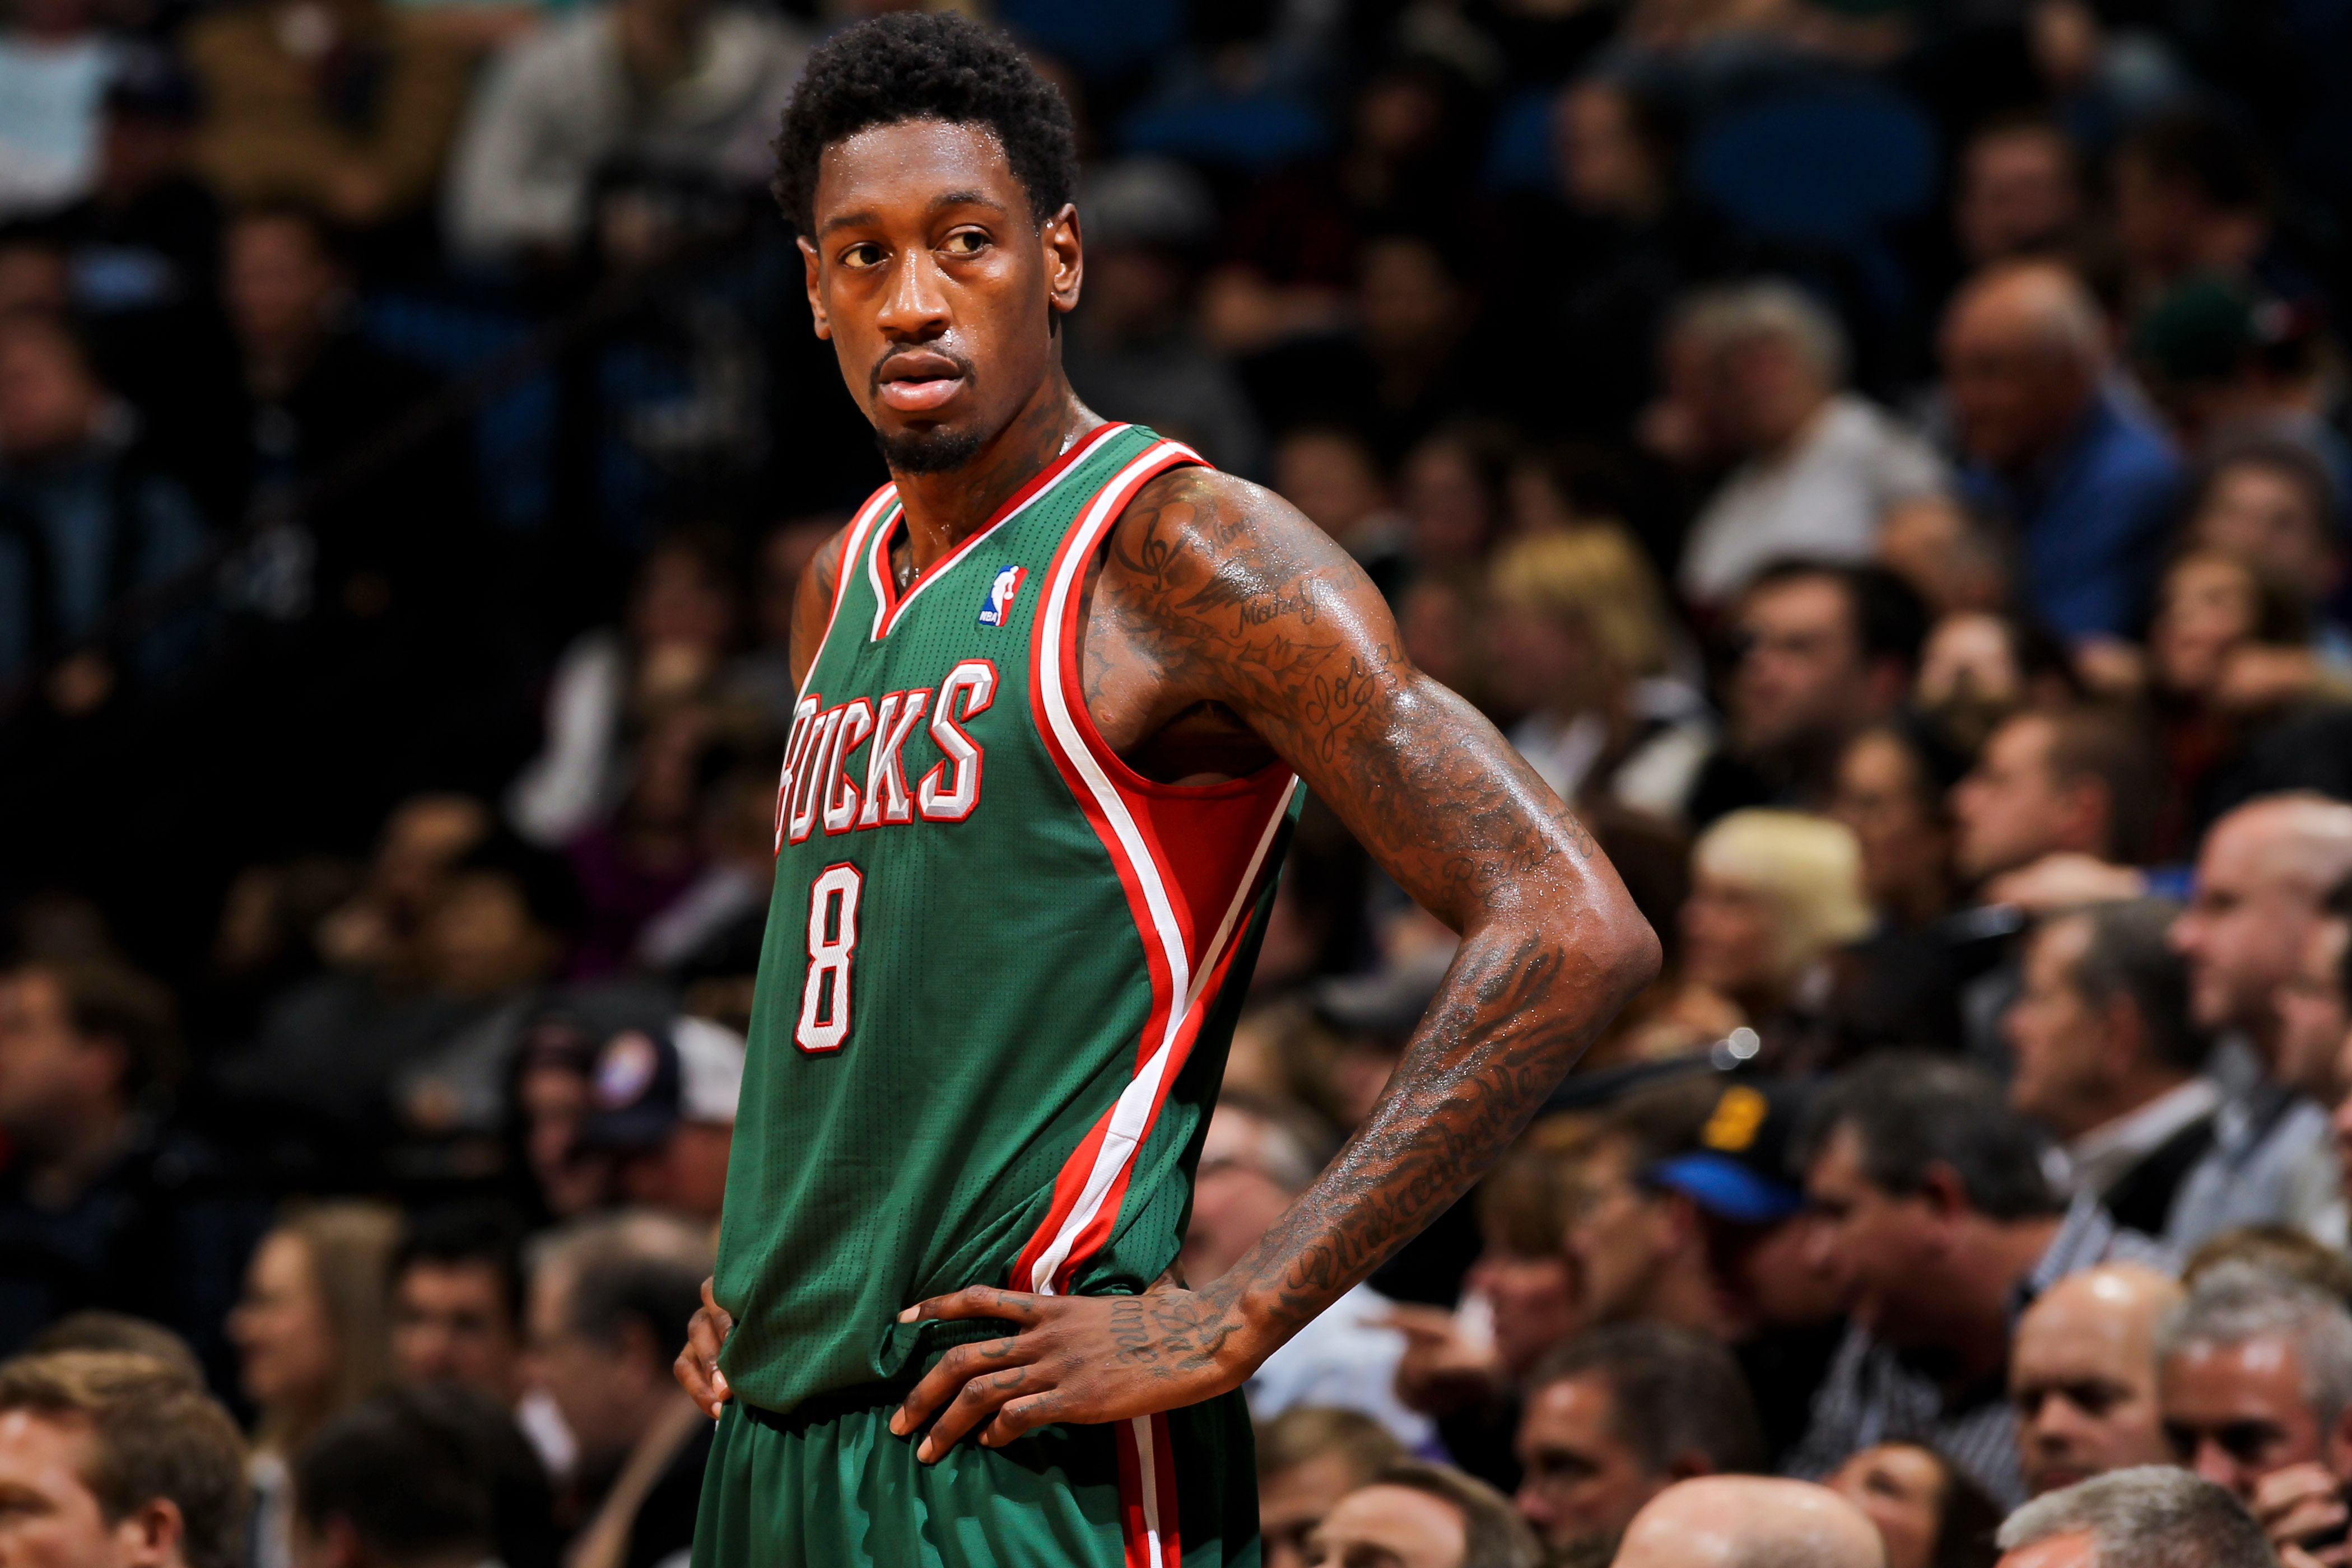 If Larry Sanders quits the NBA, he is not wasting his talent